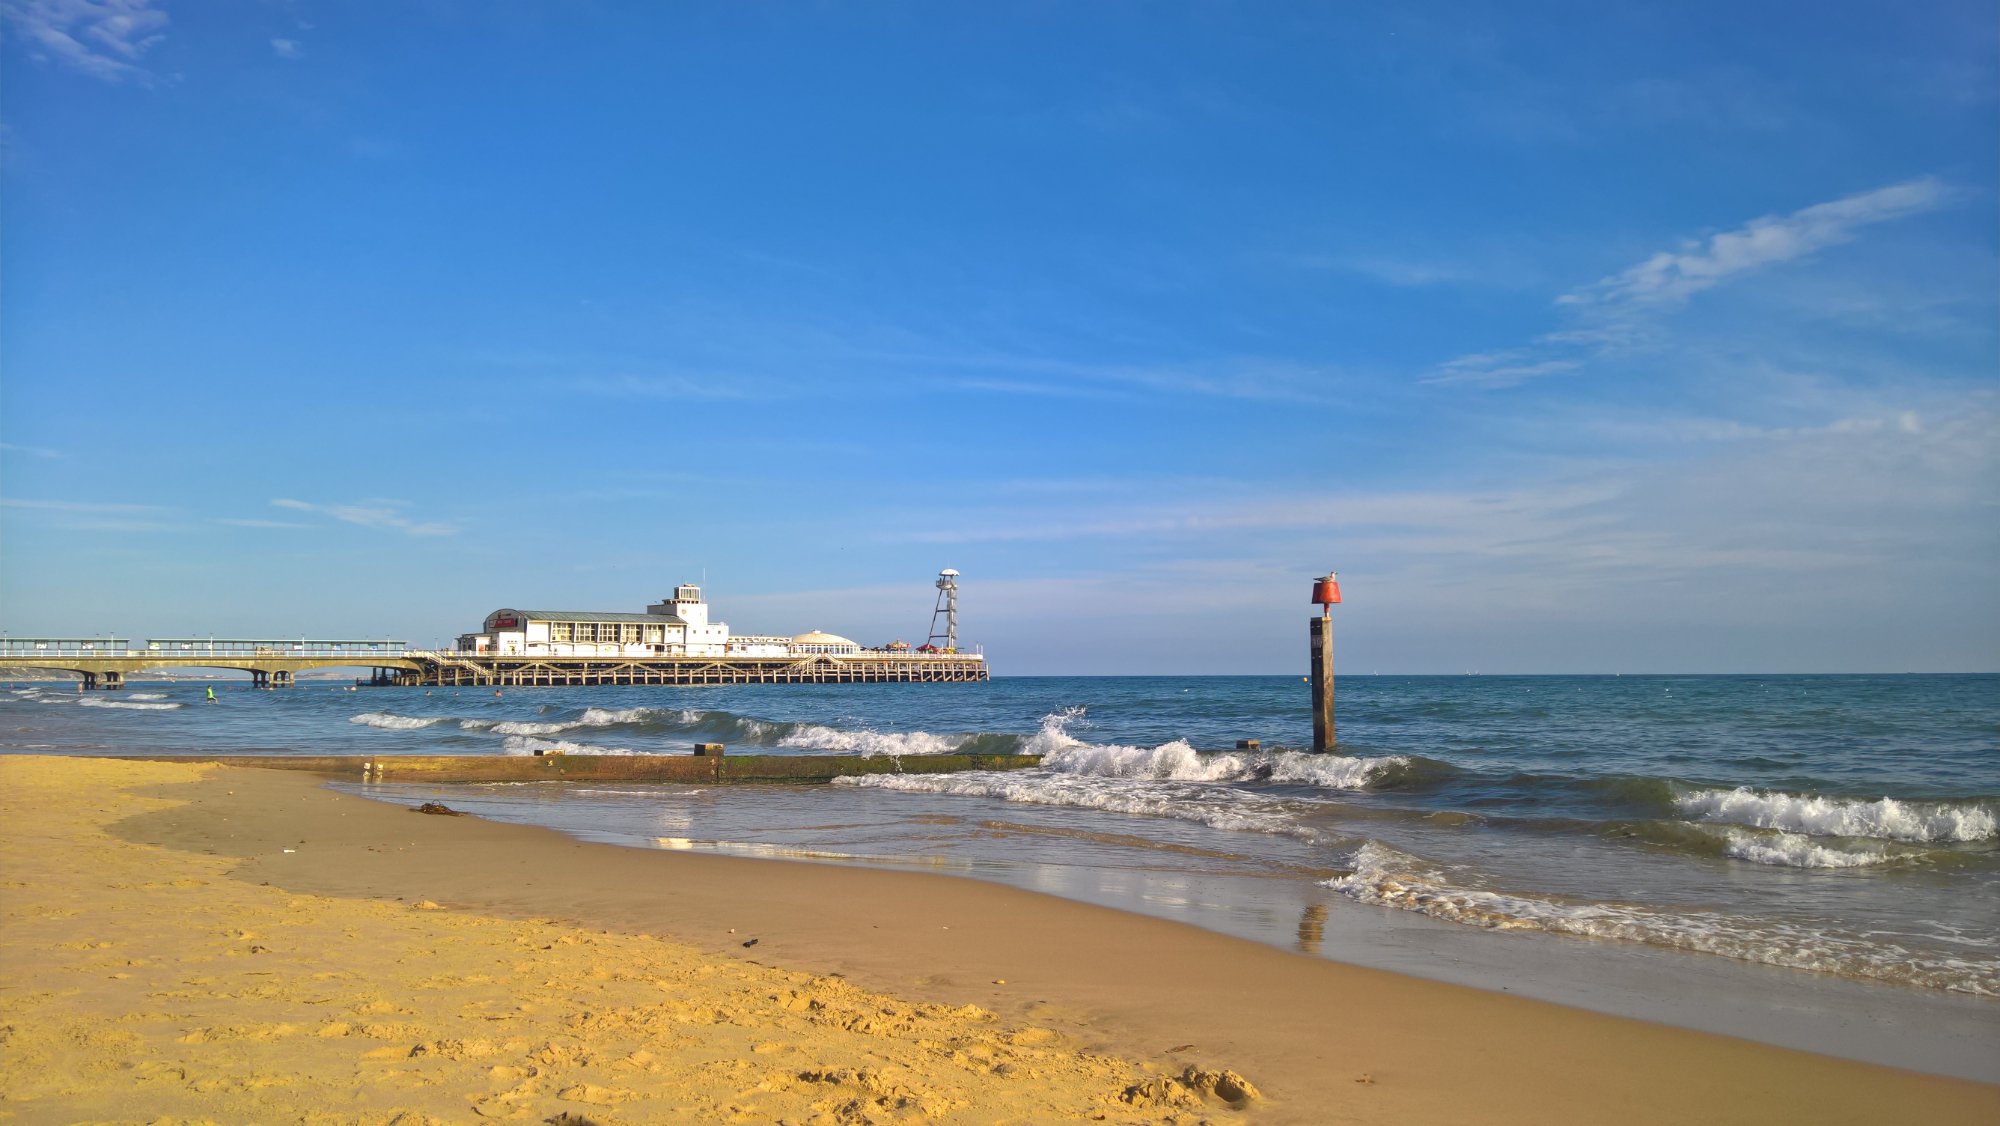 Bournemouth Beach was praised for its traditional seaside attractions (TripAdvisor/PA)